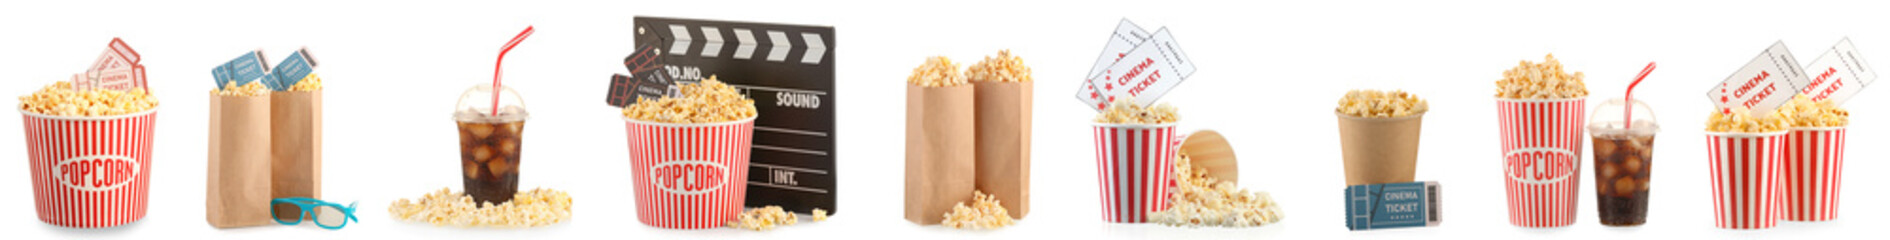 Set of tasty popcorn with cold cola, cinema tickets and movie clapperboard on white background